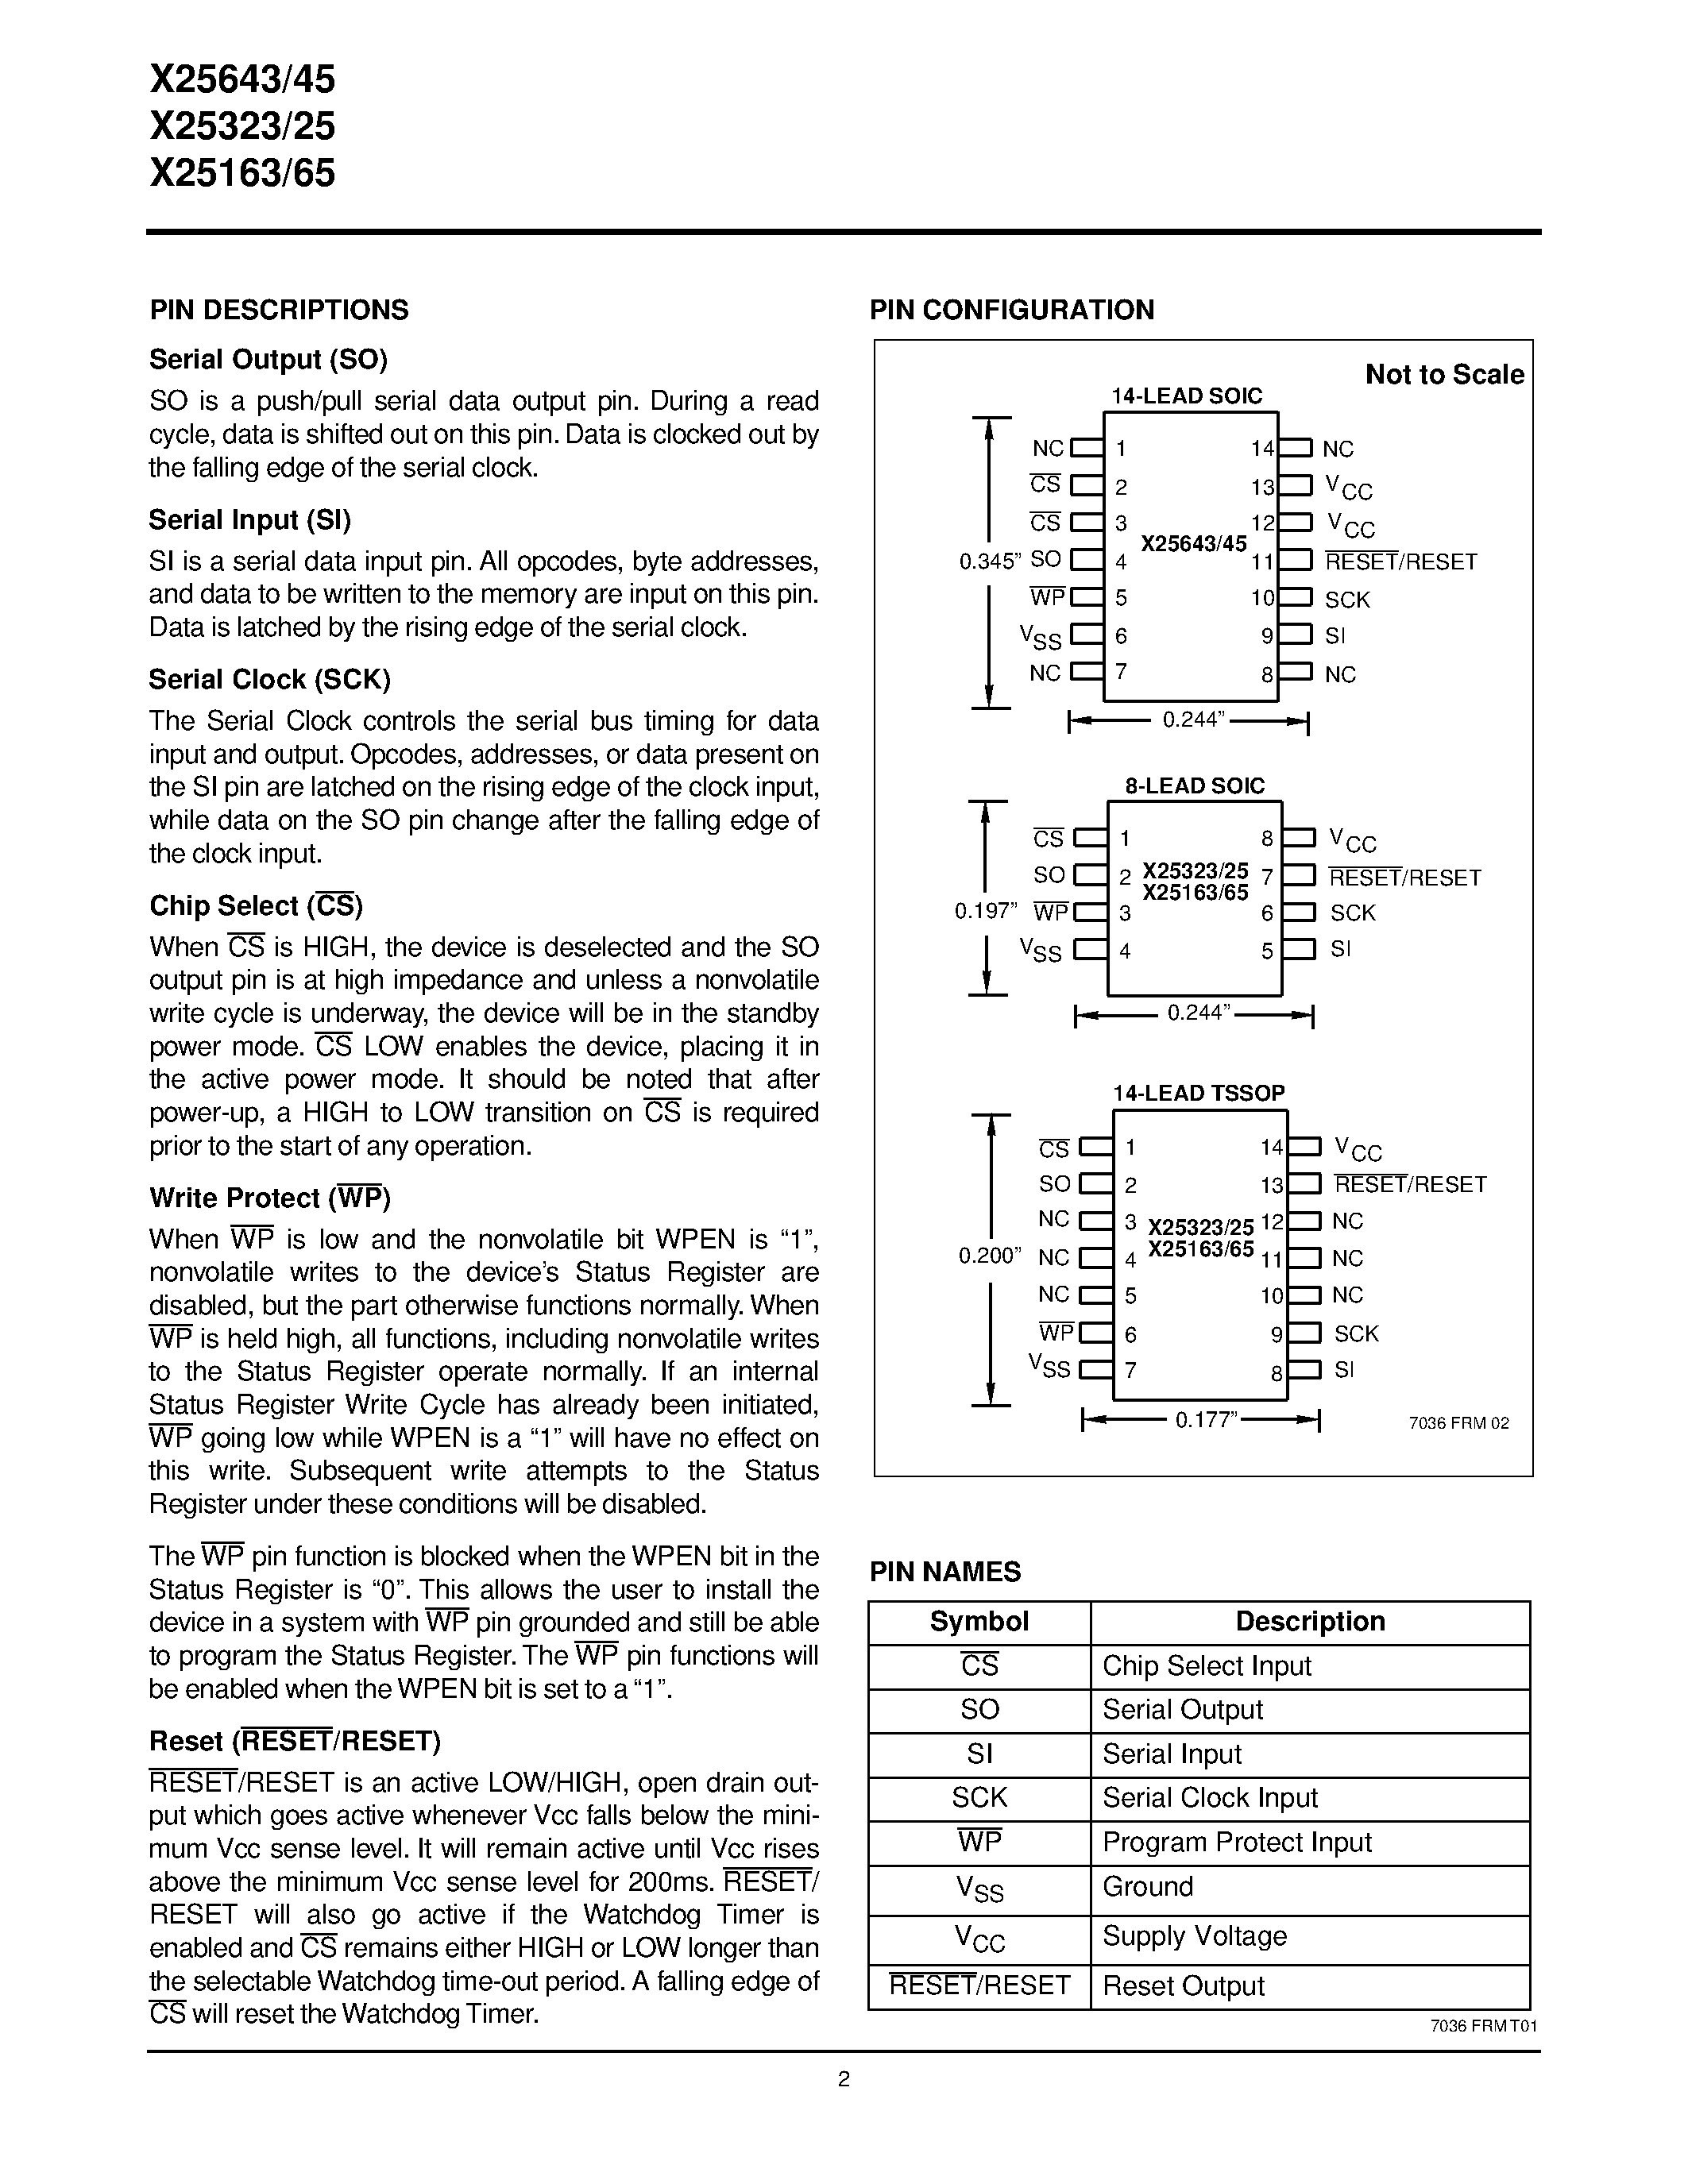 Datasheet X25323V14-1.8 - Programmable Watchdog Timer & V CC Supervisory Circuit w/Serial E 2 PROM page 2